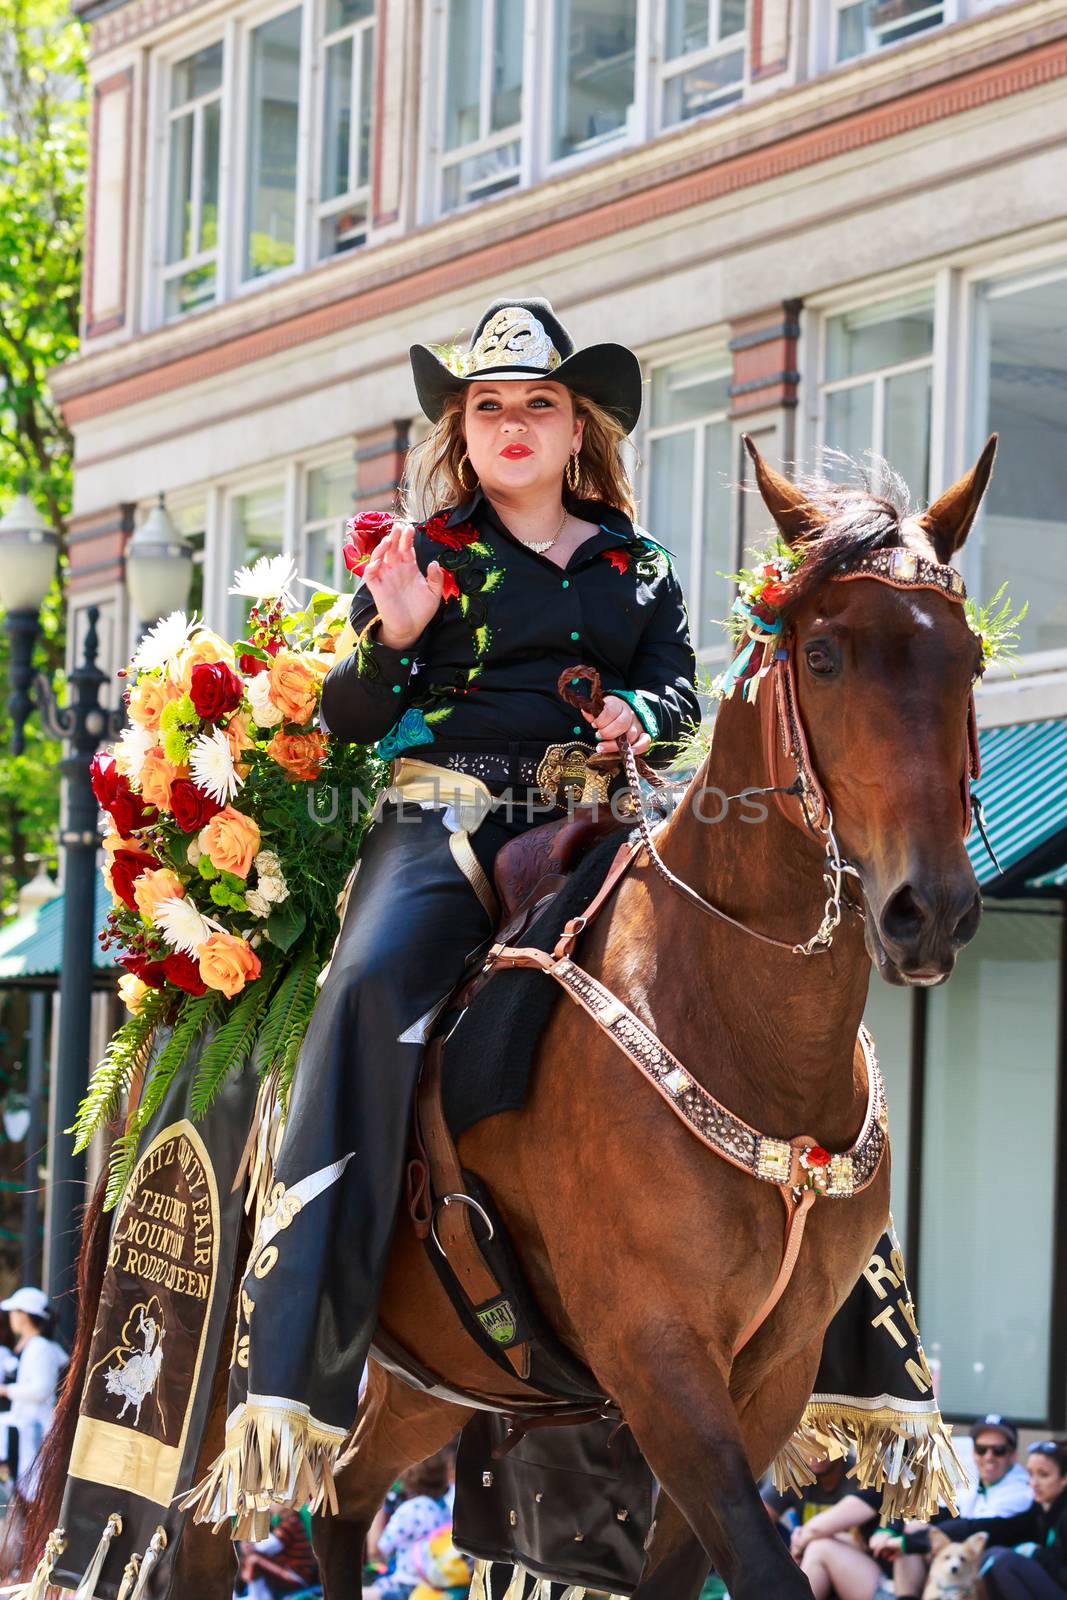 Portland, Oregon, USA - JUNE 7, 2014: Miss Thunder Mountain Pro Rodeo Queen, Brianna Howell in Grand floral parade through Portland downtown.